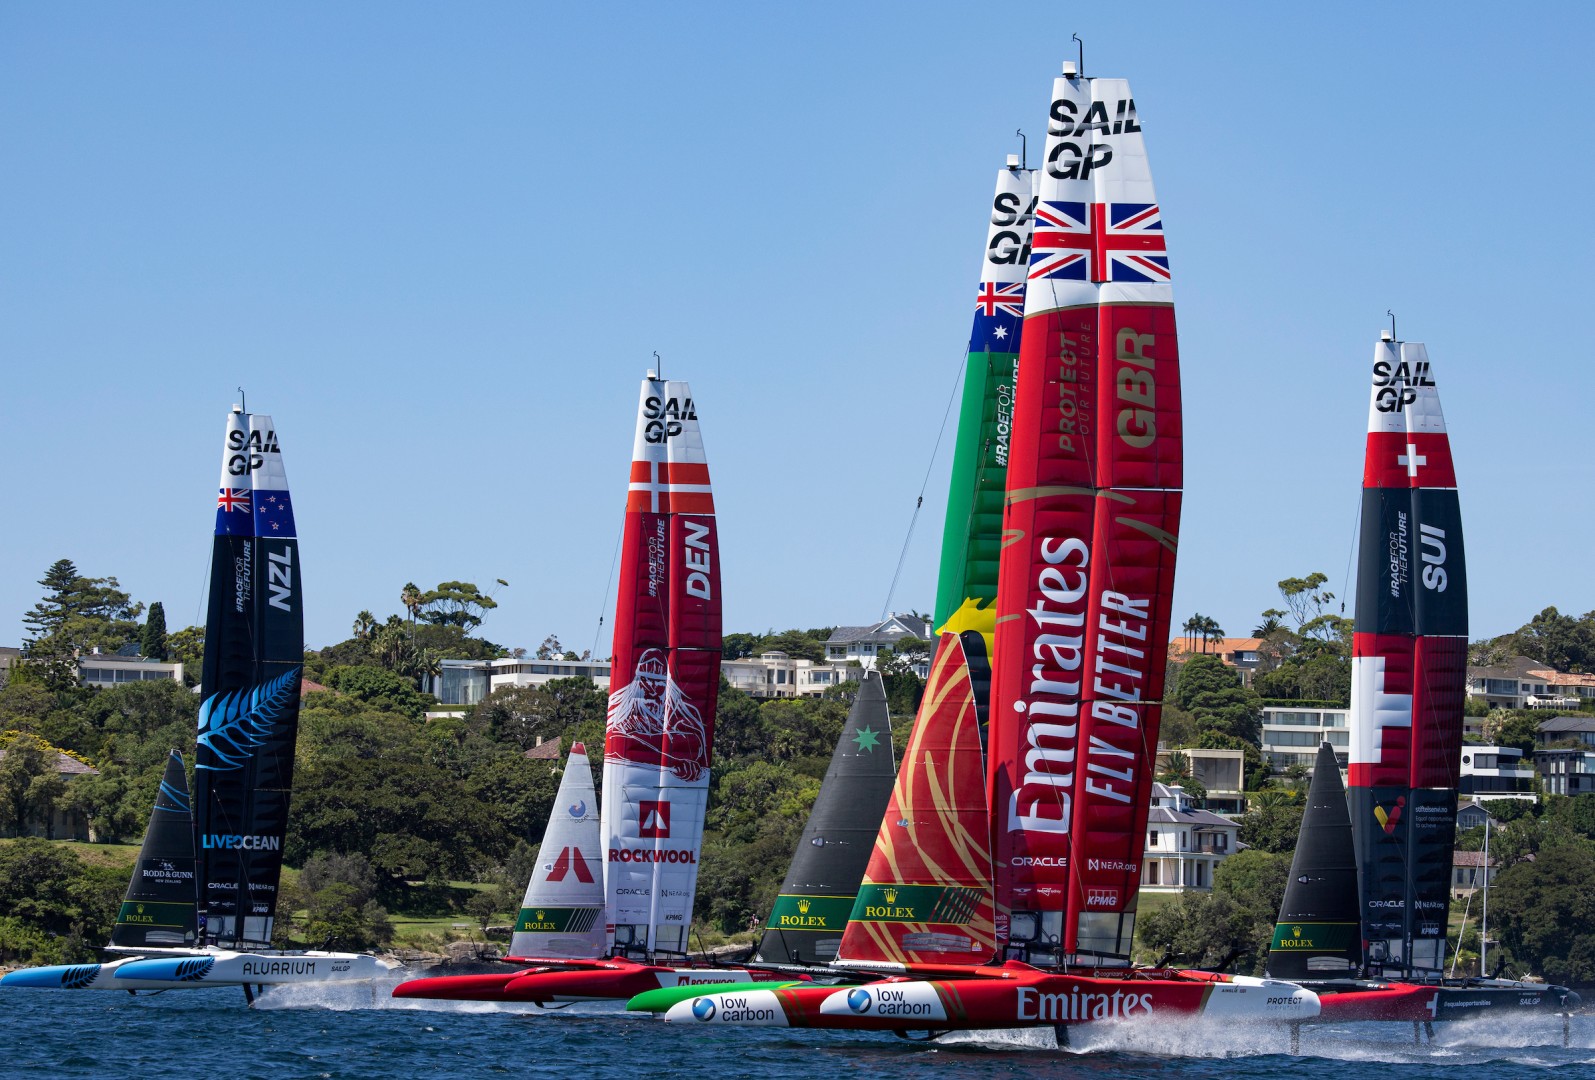 SailGP to be broadcast free-to-air around the UK across ITV network